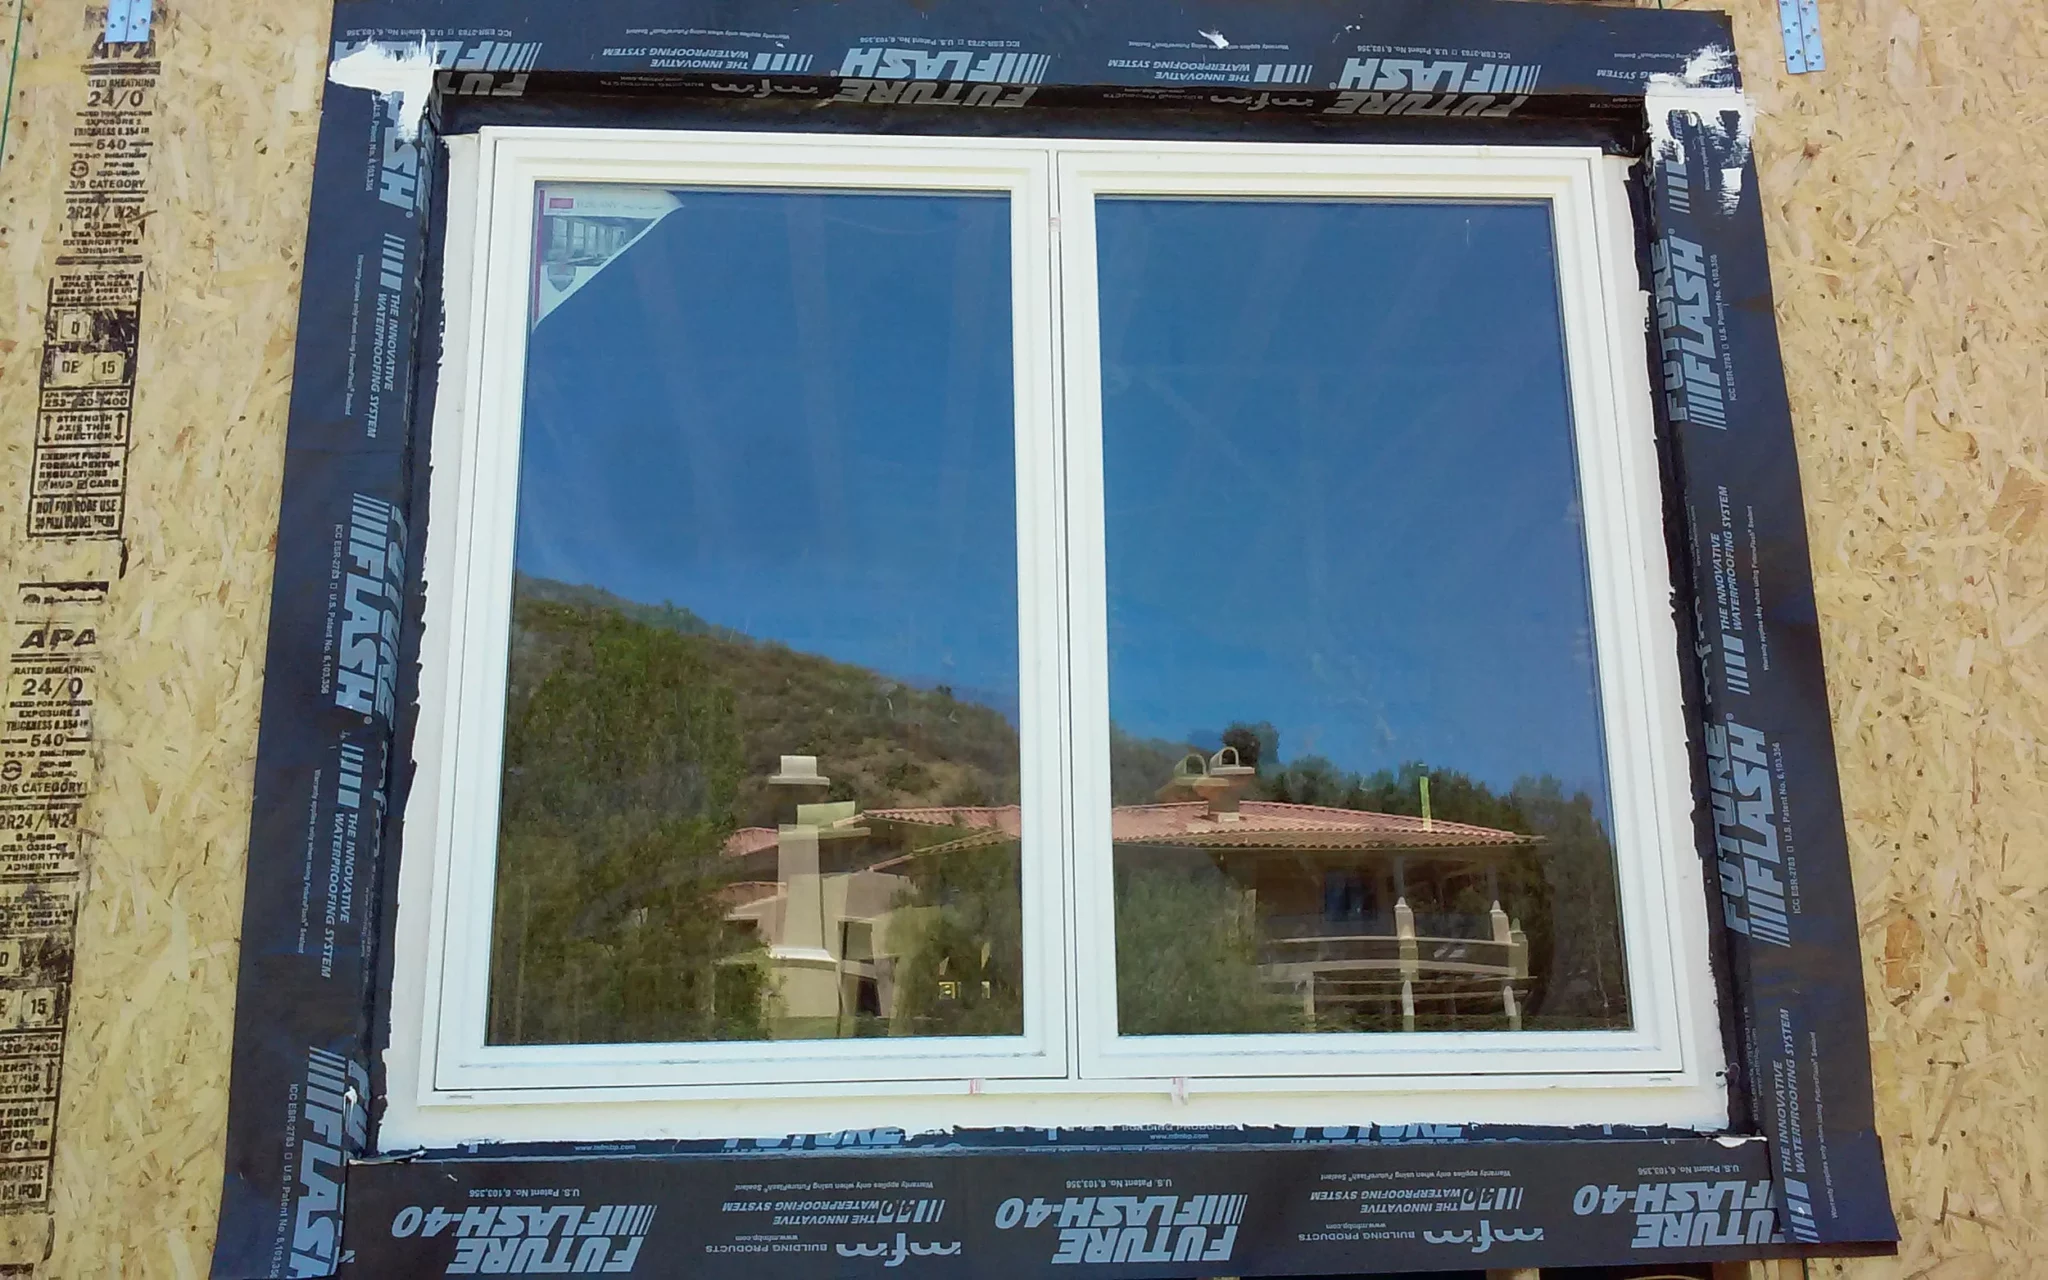 A San Francisco Bay Area Waterproofing company is installing a window in a house.